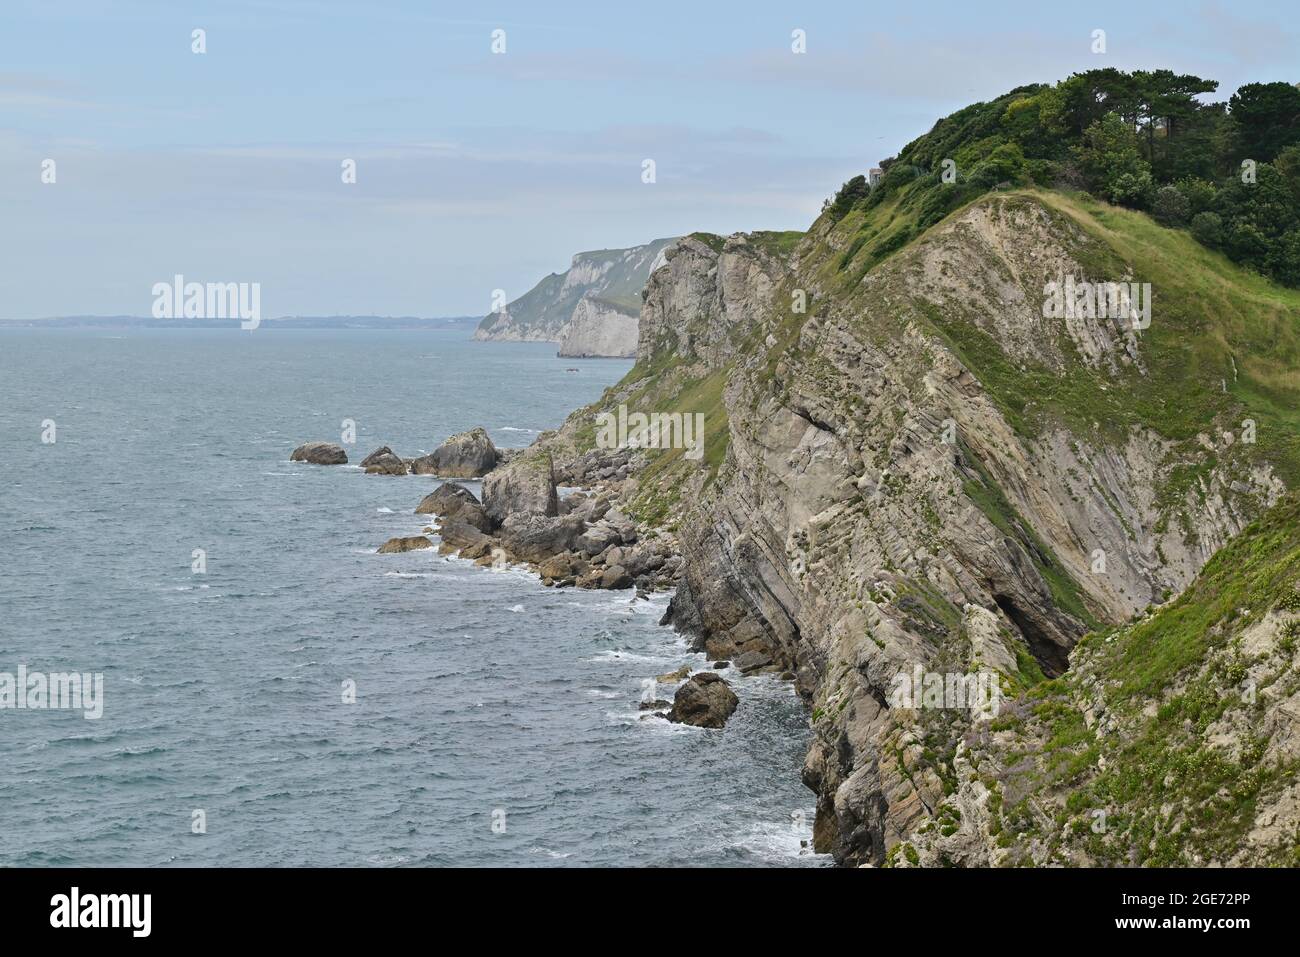 Lulworth Cove, Dorset, UK, 17th August 2021, Weather. Summer continues in a disappointingly cool vein but clouds eventually give way to bright sunshine on the Jurassic Coast. Looking west along the rugged coastline. Credit: Paul Biggins/Alamy Live News Stock Photo